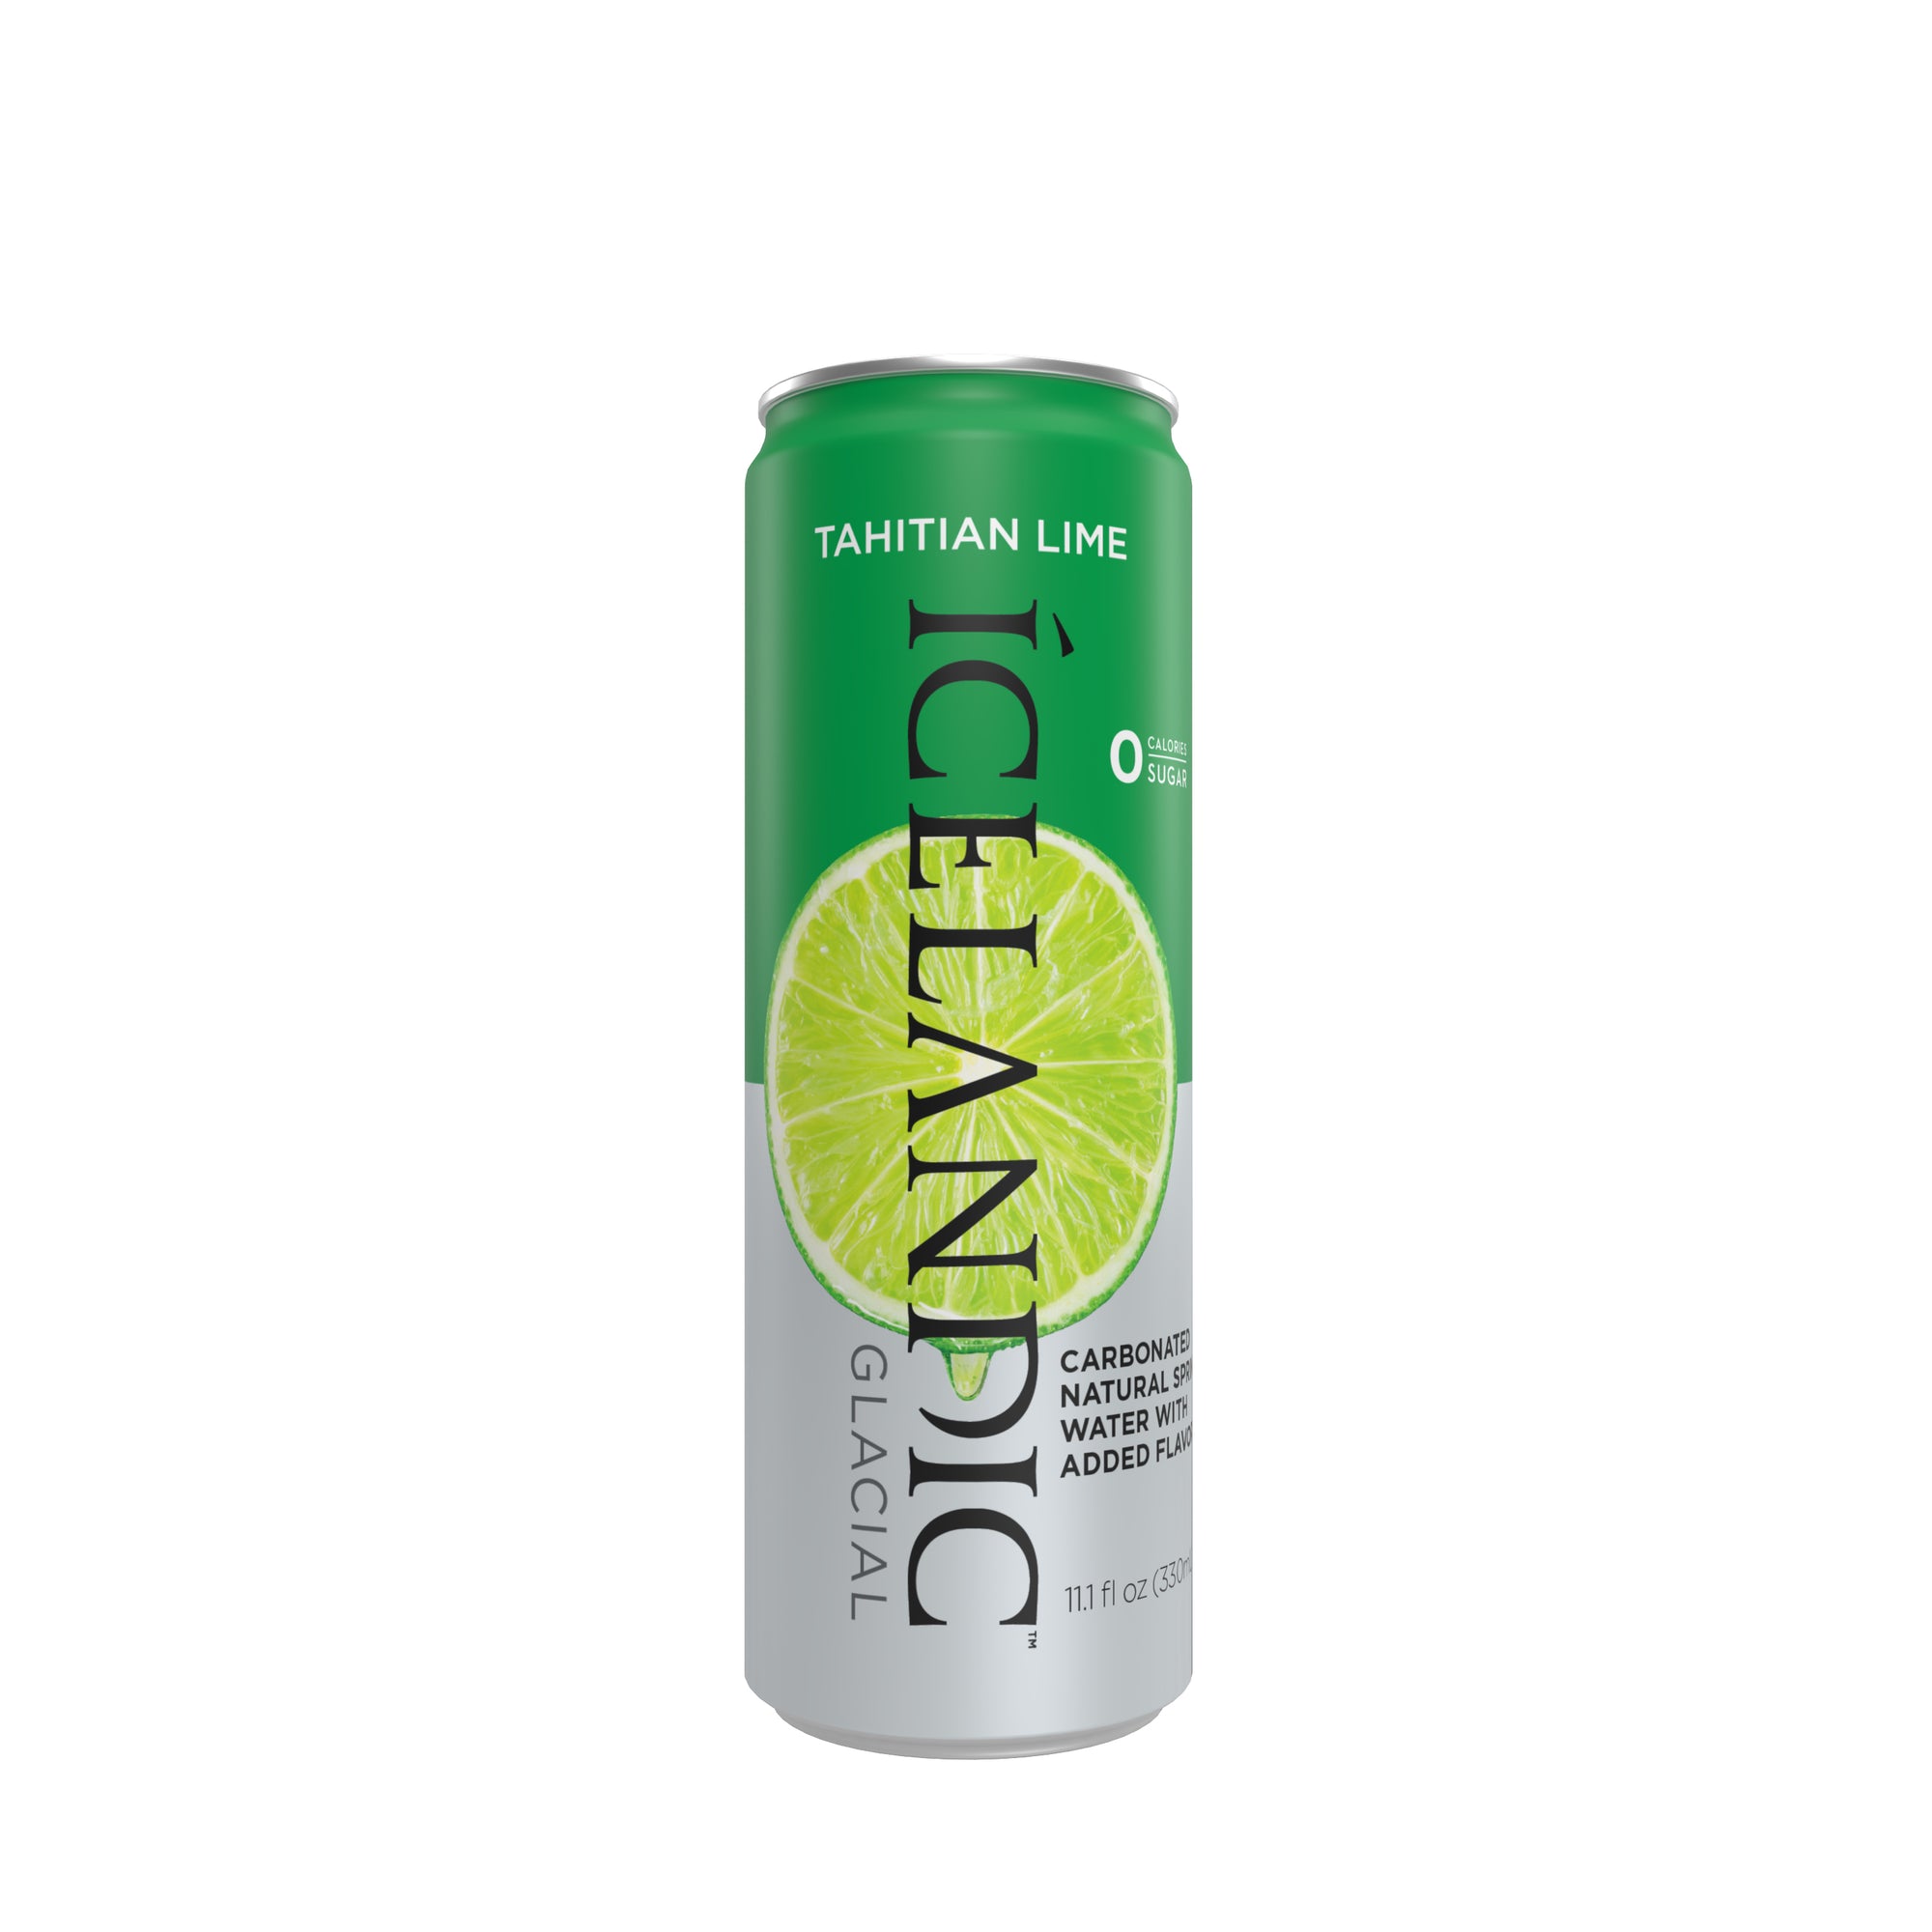 Icelandic Glacial Sparkling Tahitian Lime Water in Aluminum Cans (10 pack) - Icelandic Glacial